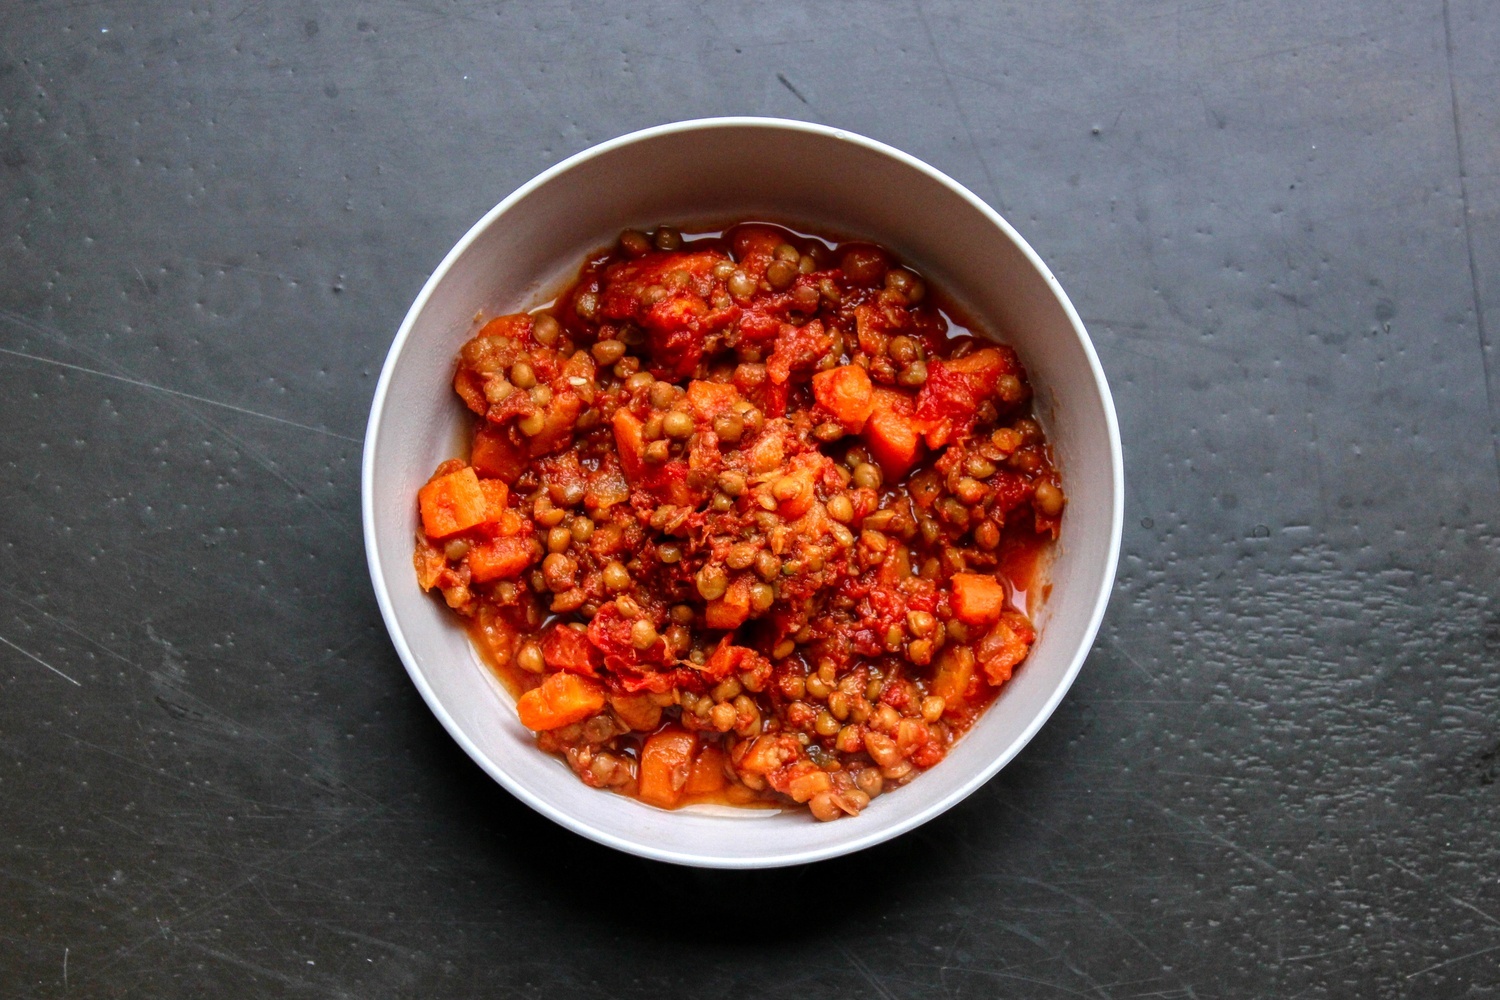 Lentil dahl with carrot and bell pepper